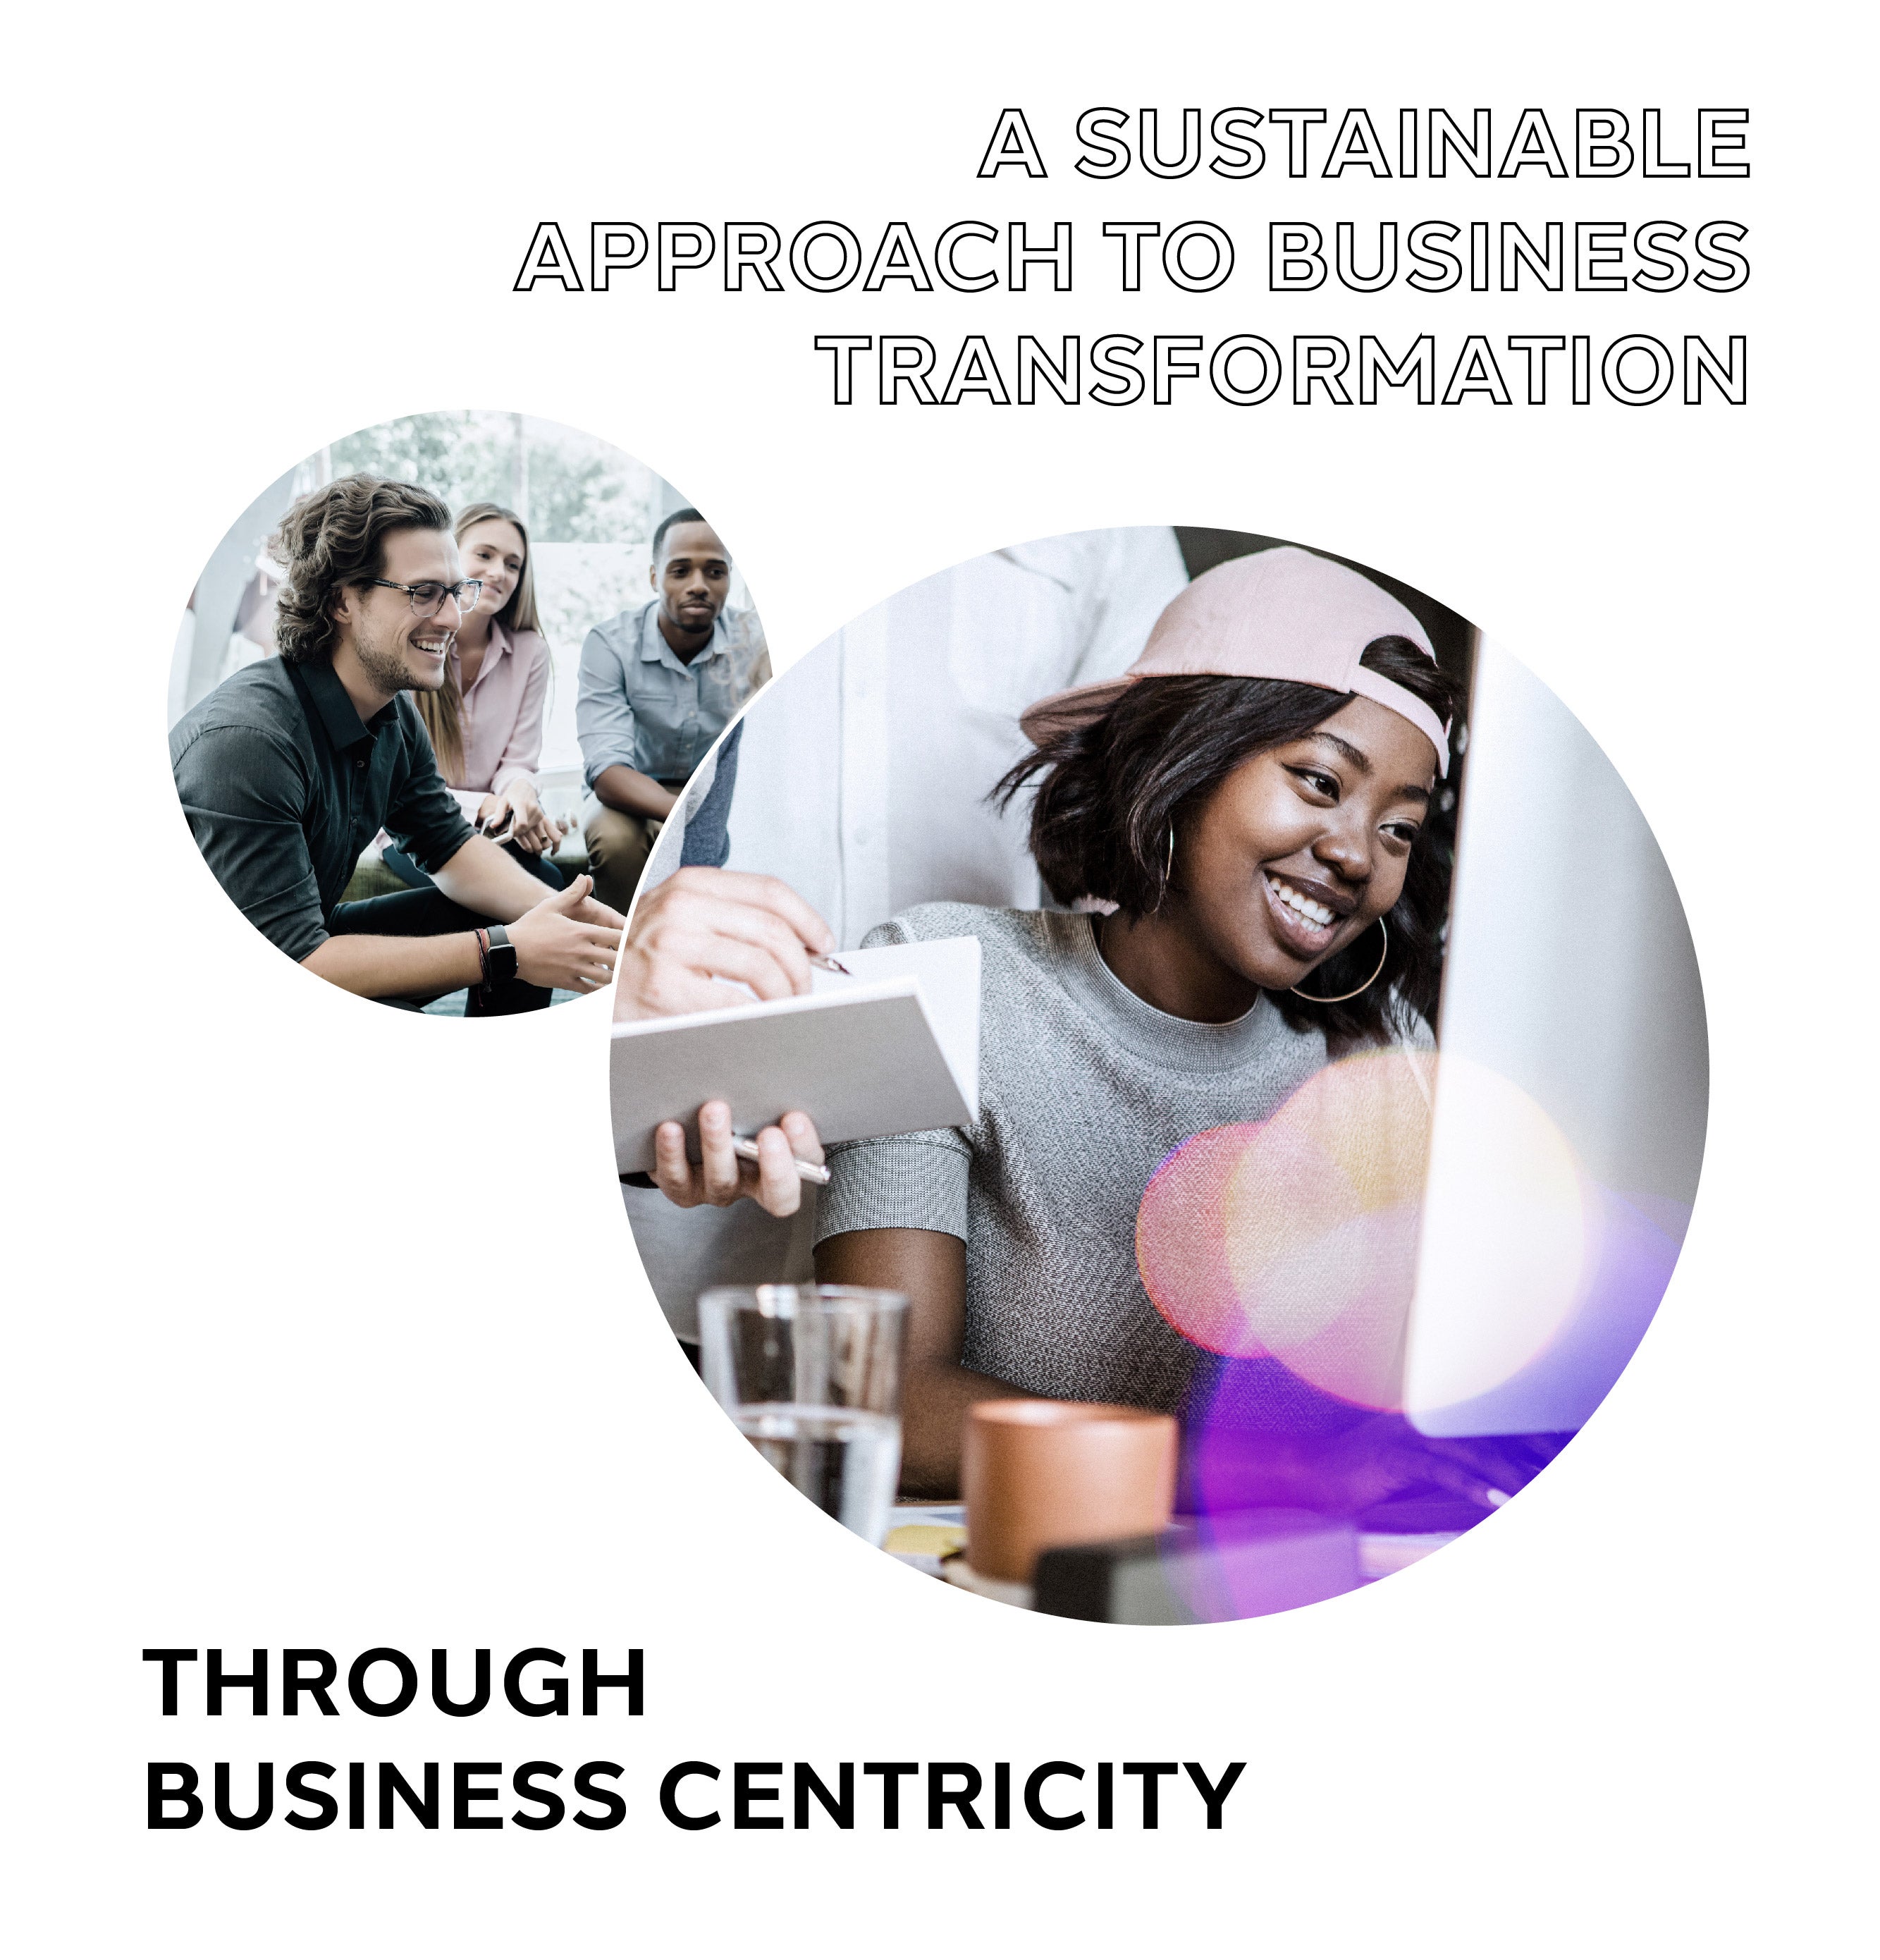 A Sustainable Approach to Business Transformation Through Customer Centricity